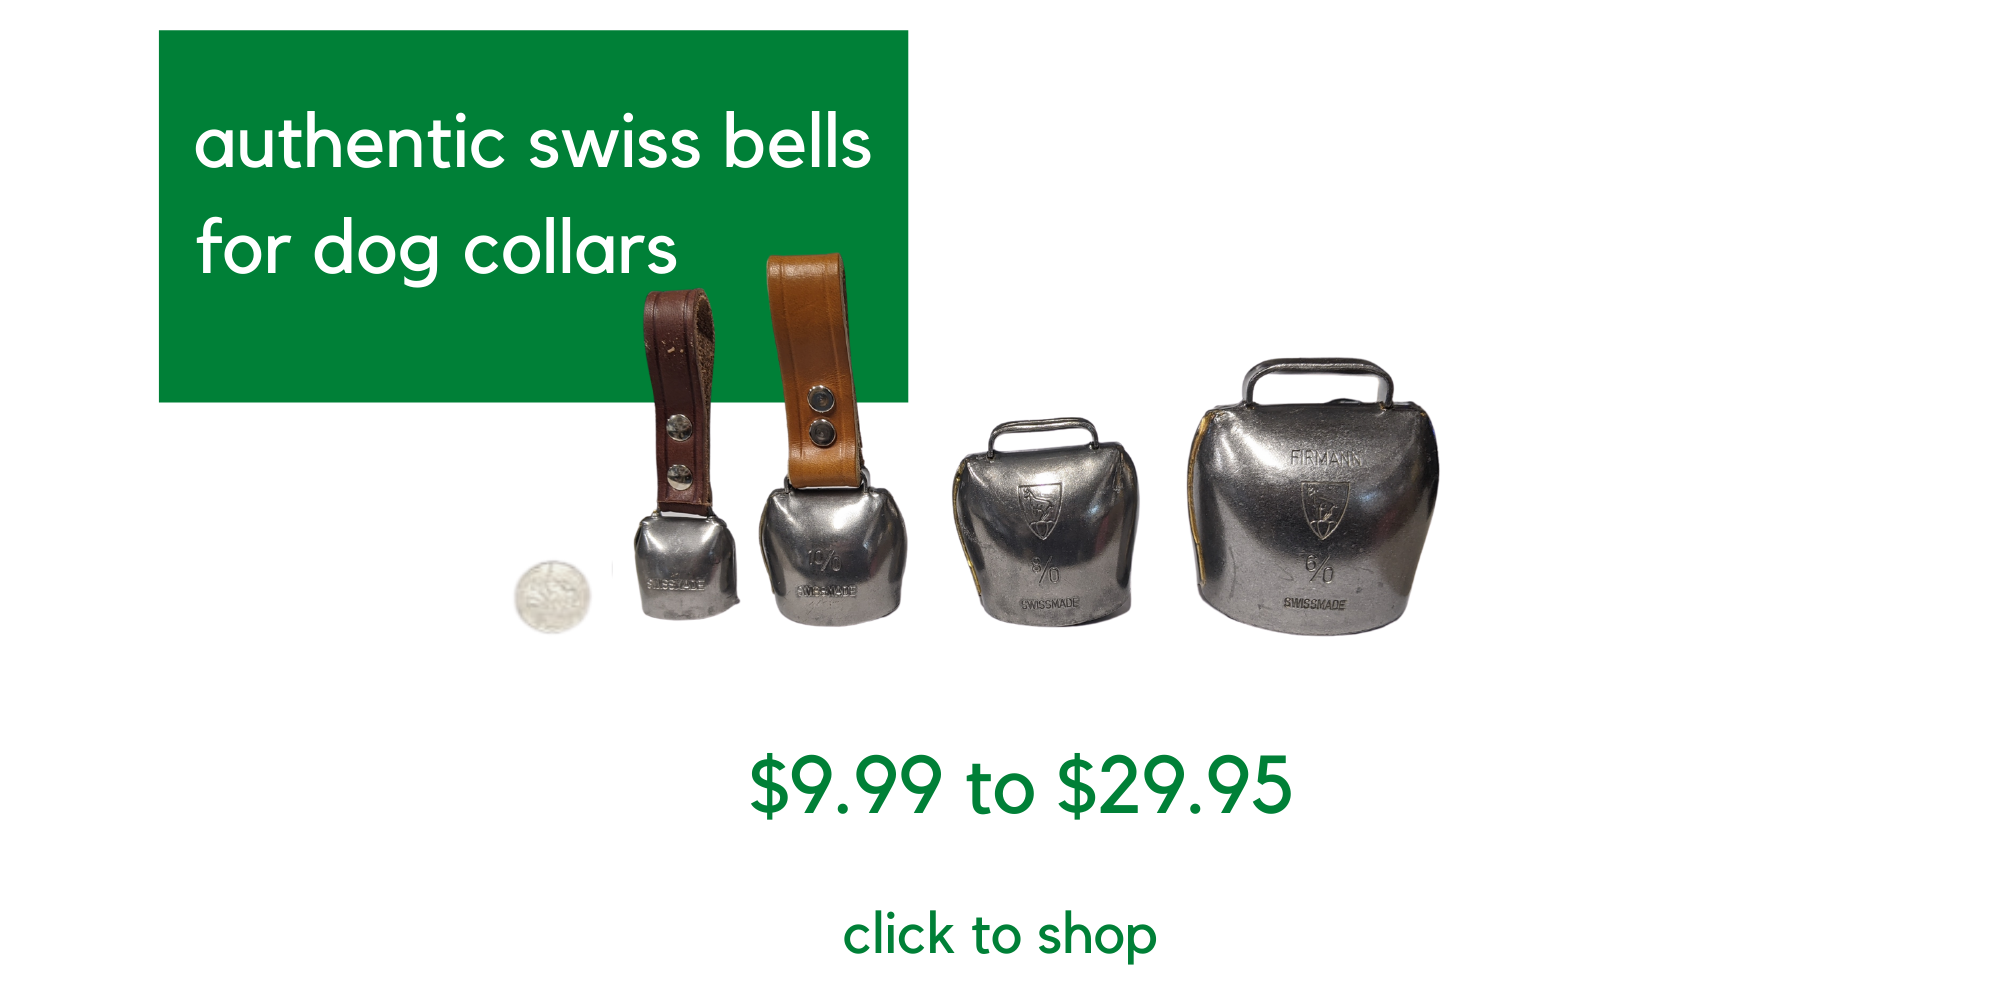 authentic swiss bells for dog collars